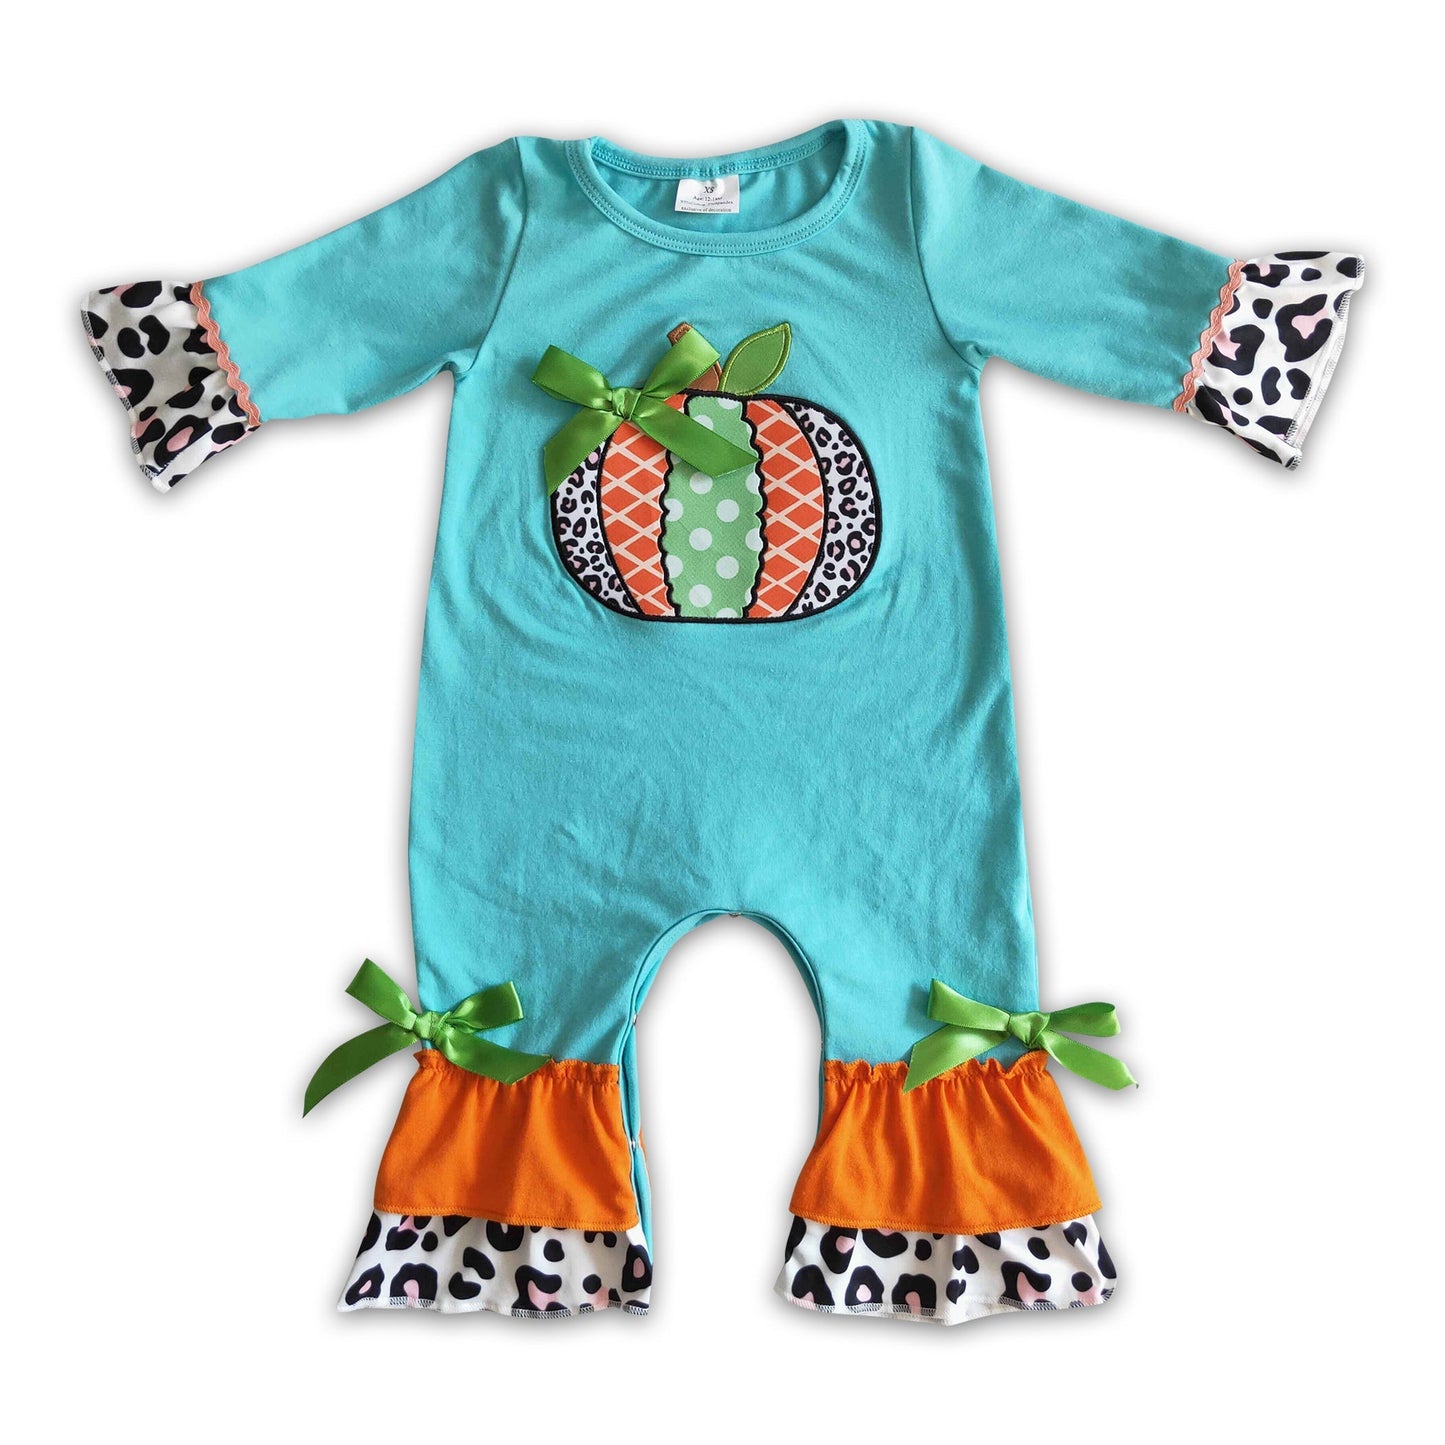 Teal cotton pumpkin embroidery baby romper